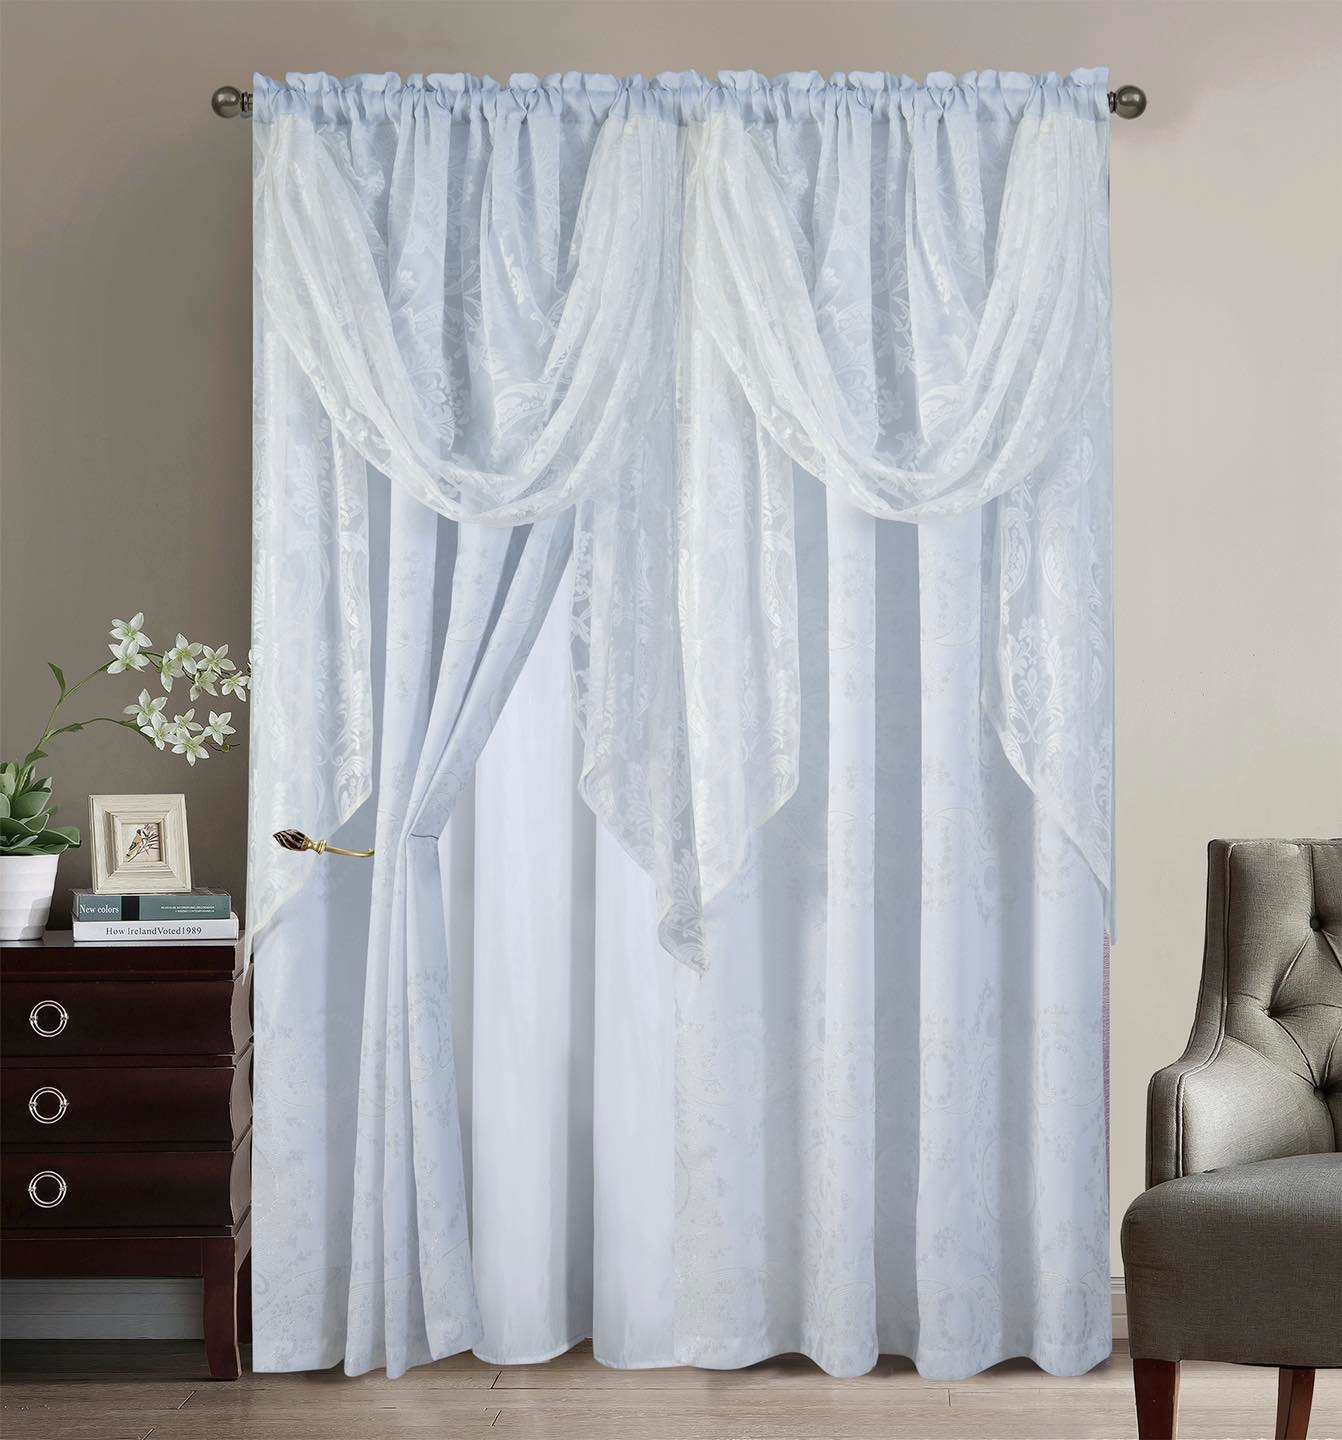 2PC CURTAIN SET W/ ATTACHED VALANCE & BACKING - Michelle